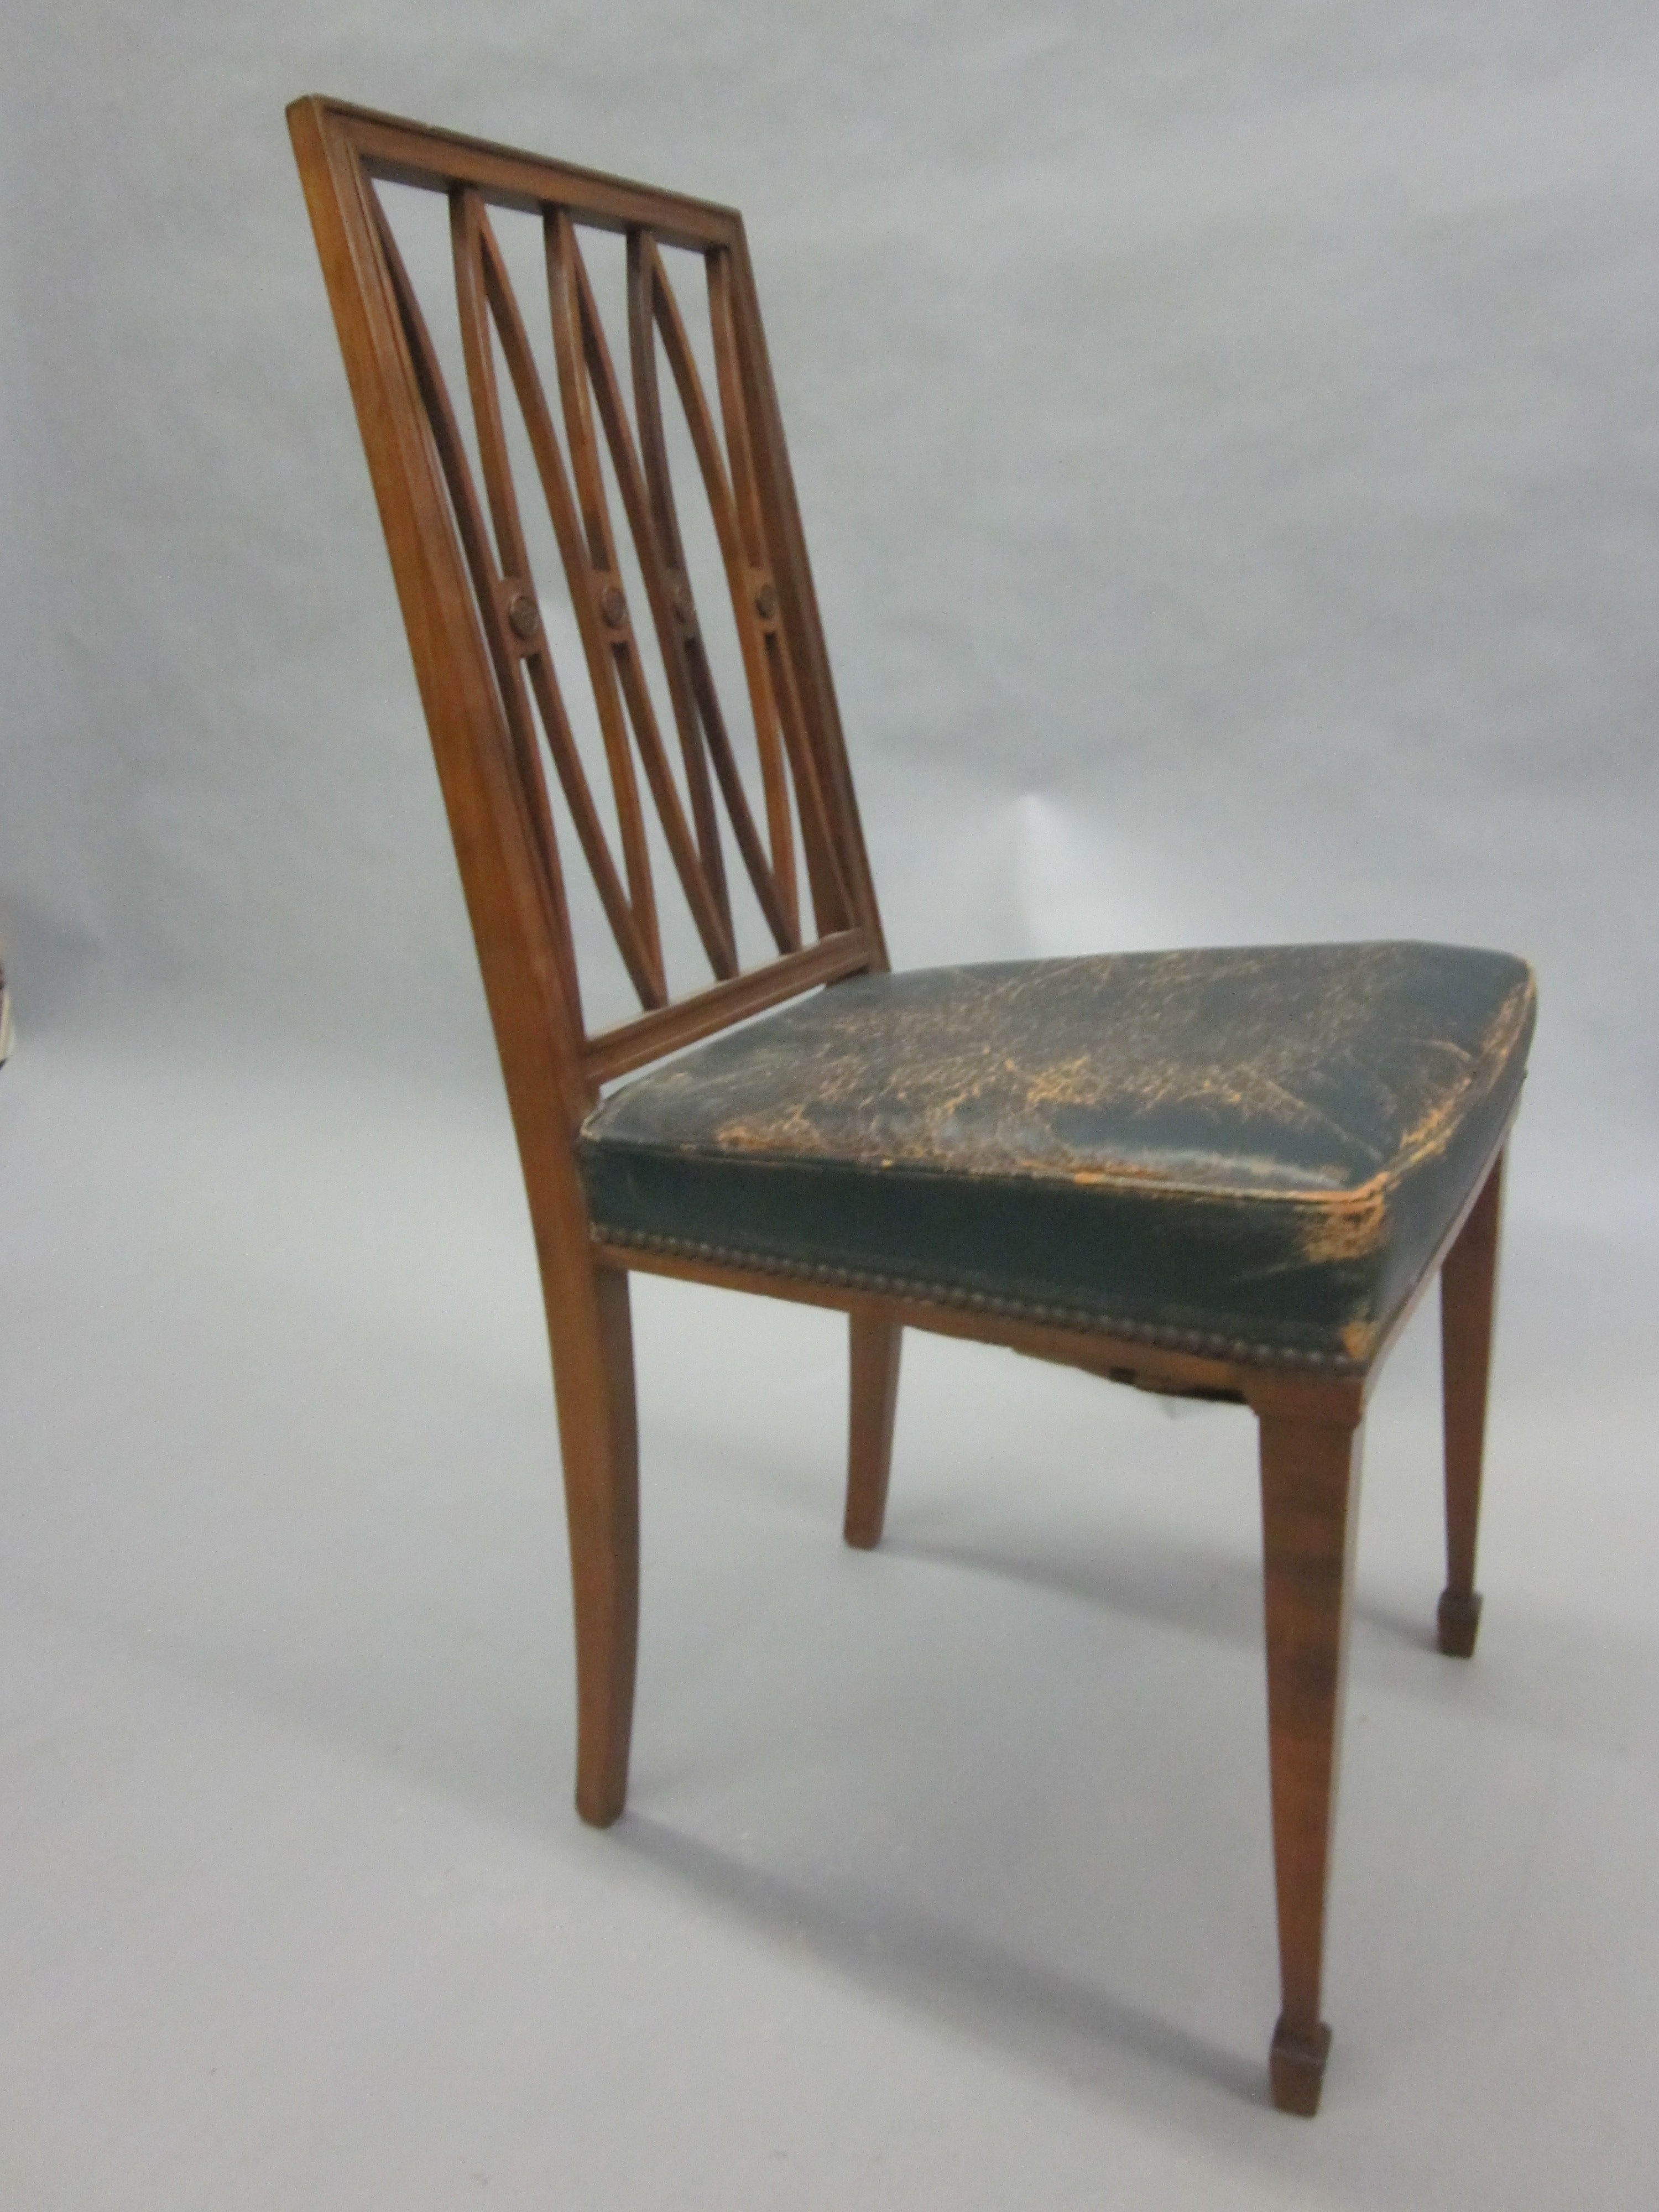 2 French Modern Neoclassical Desk Chairs / Side Chairs, Attributed Andre Arbus